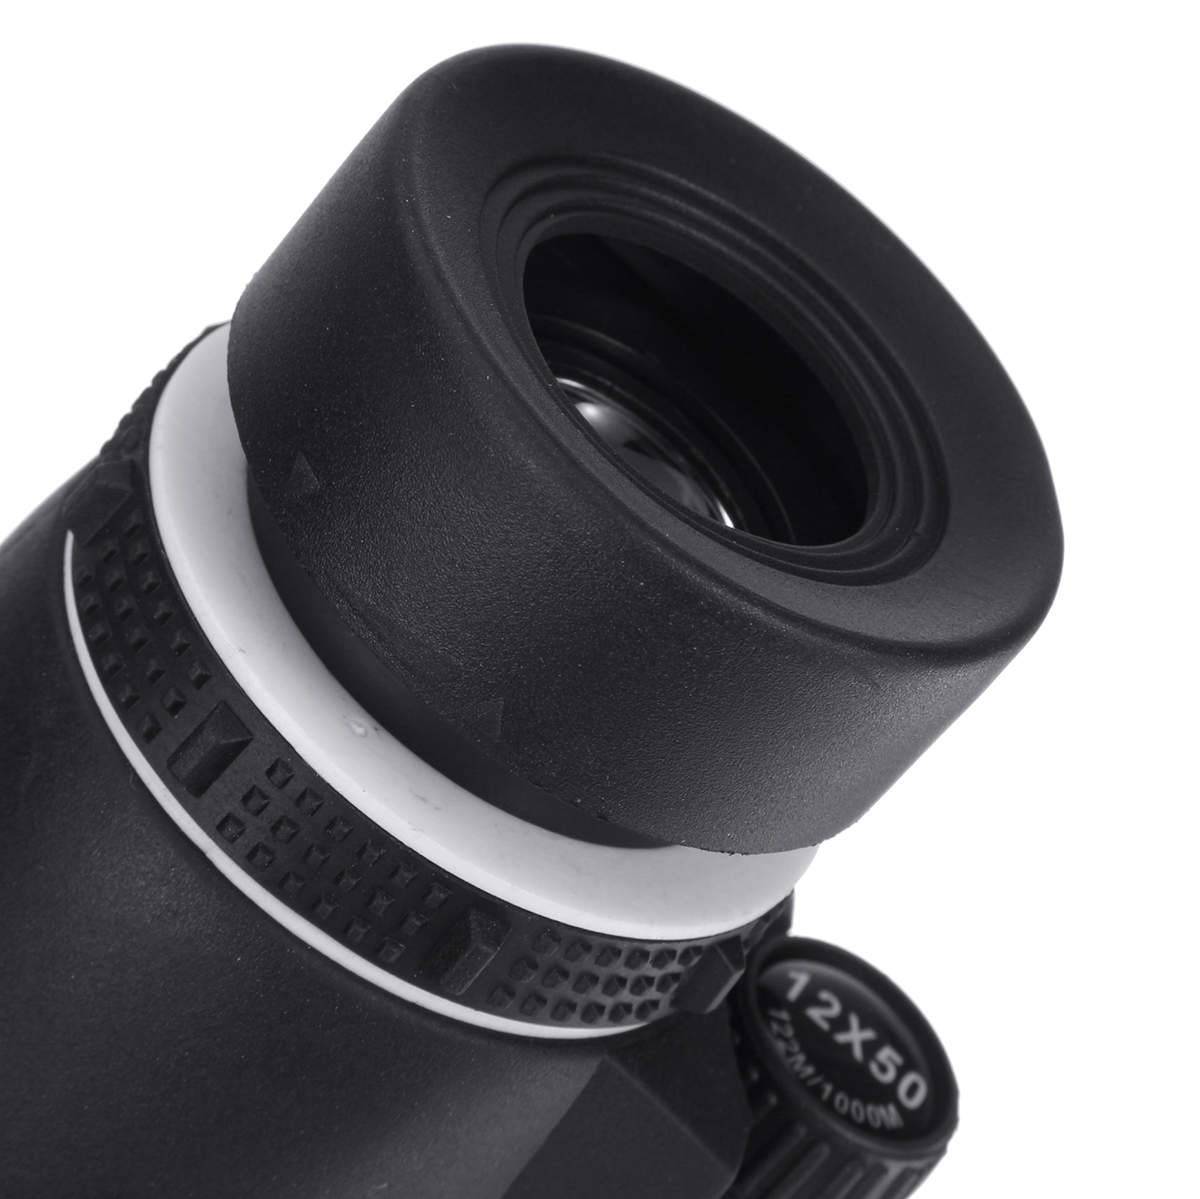 1250-High-Optical-Monocular-with-Laser-Night-Light-Function-Portable-Telescope-for-Bird-Watching-Tar-1858194-10